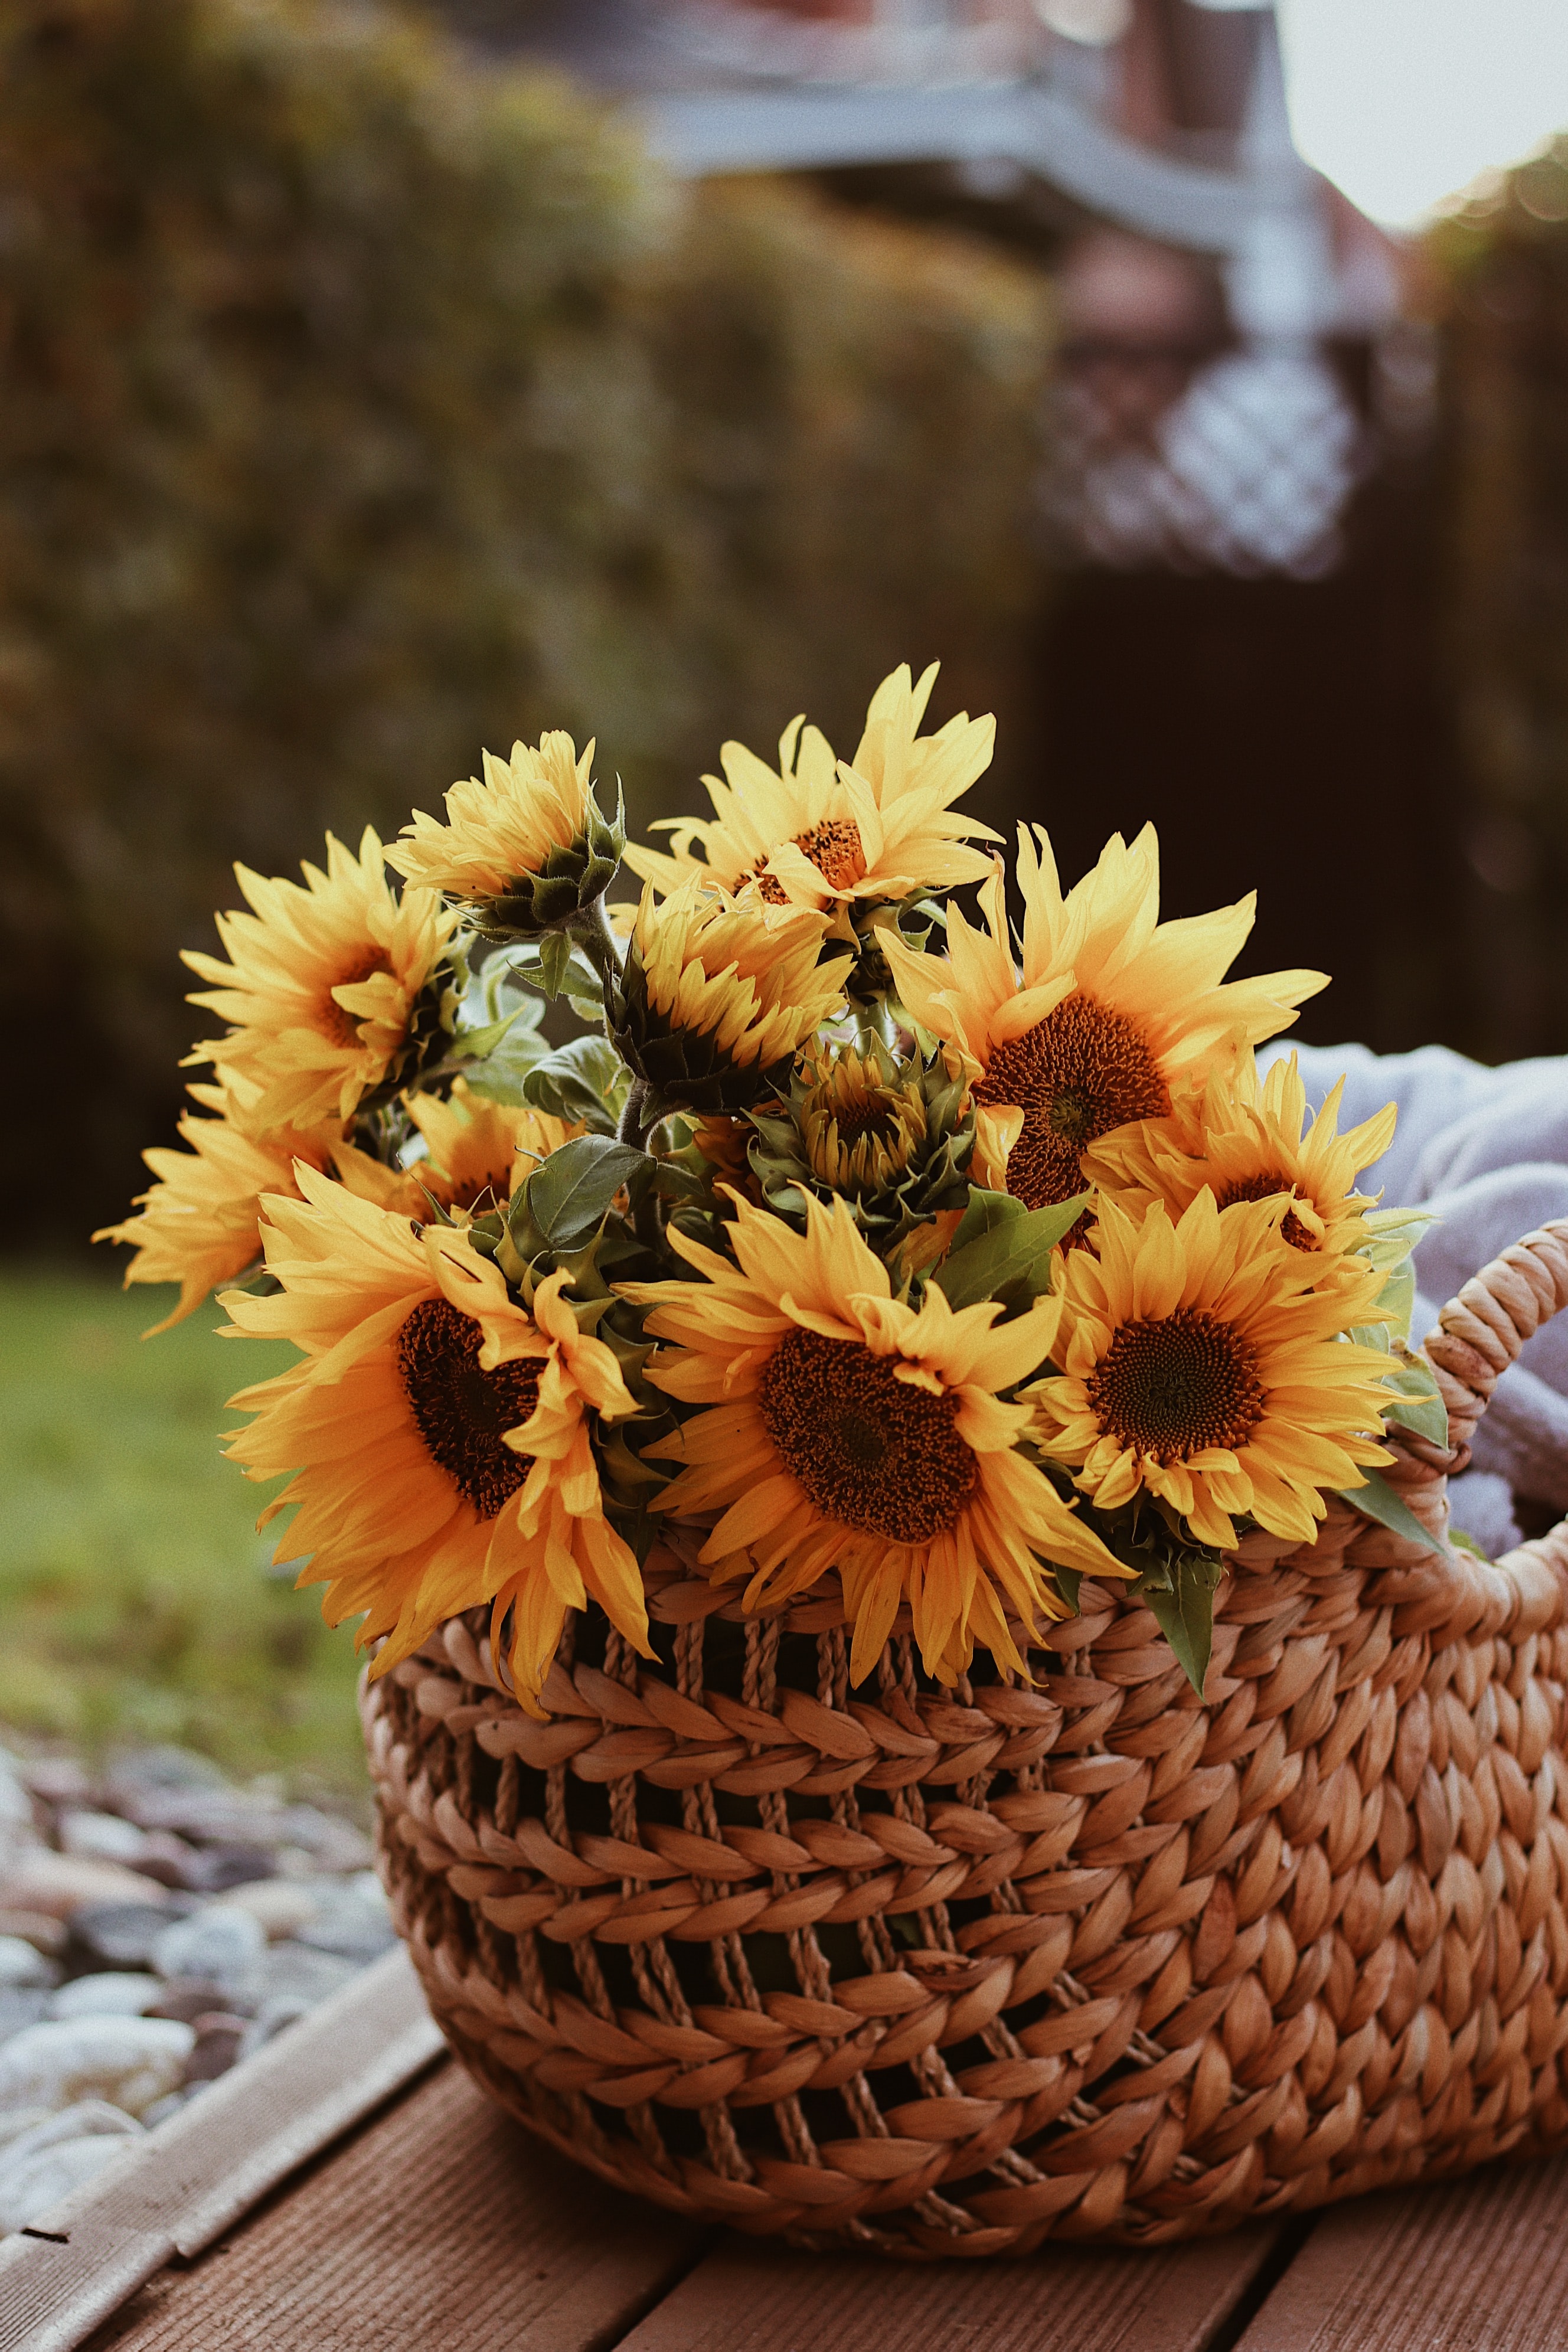 65322 download wallpaper bouquet, flowers, basket, sunflower screensavers and pictures for free